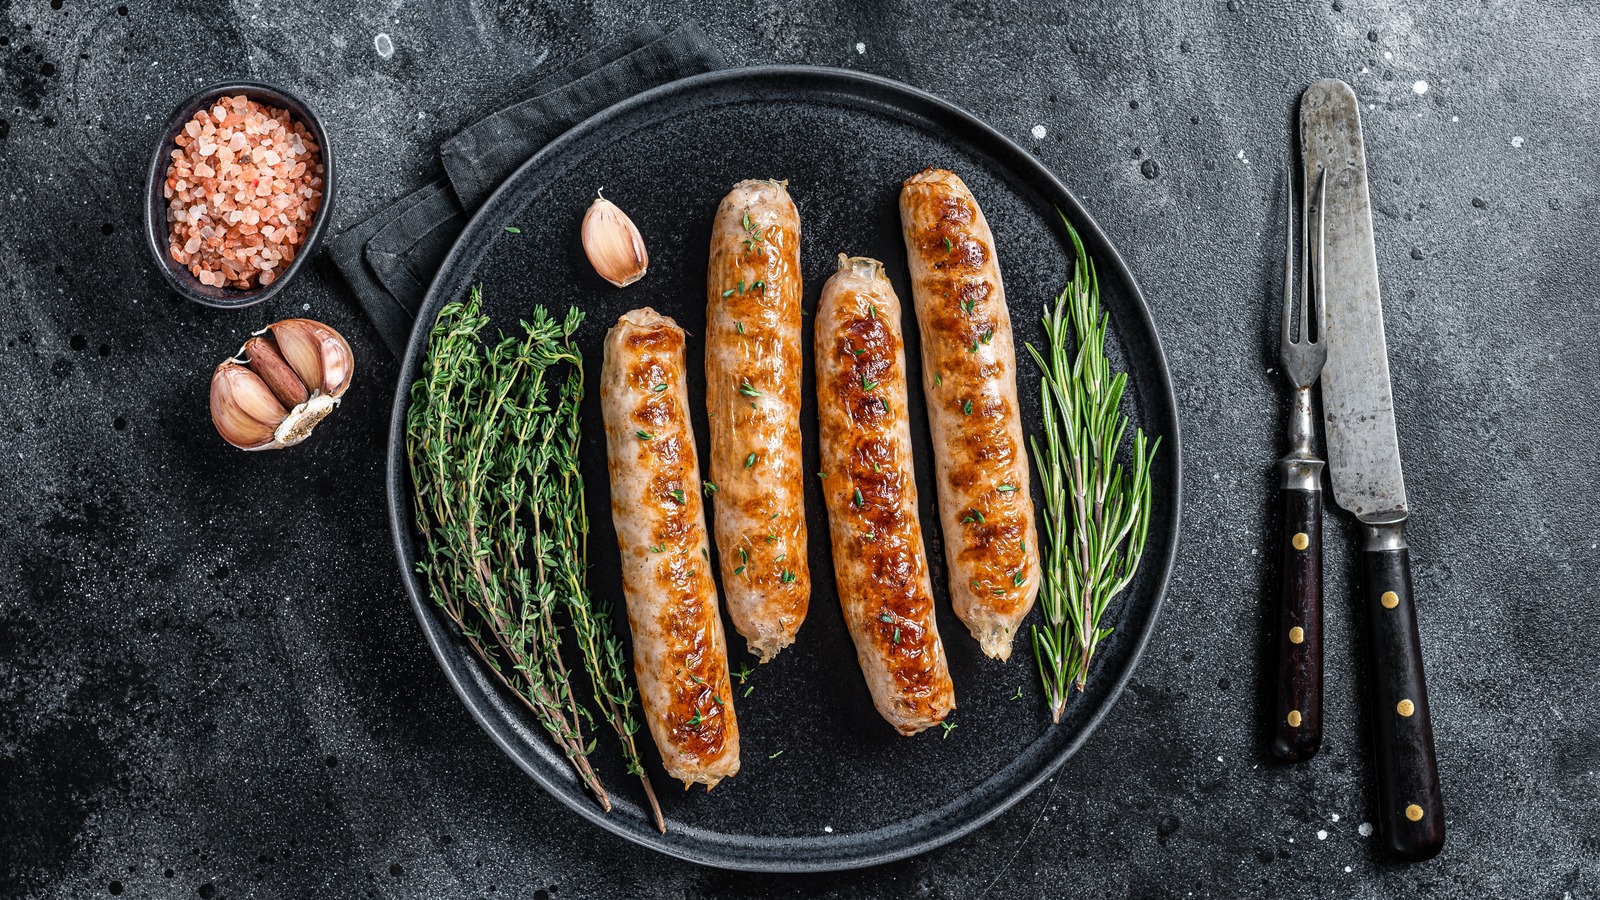 https://www.thedailymeal.com/img/gallery/best-italian-sausage-brands-you-need-to-try/l-intro-1674441210.jpg